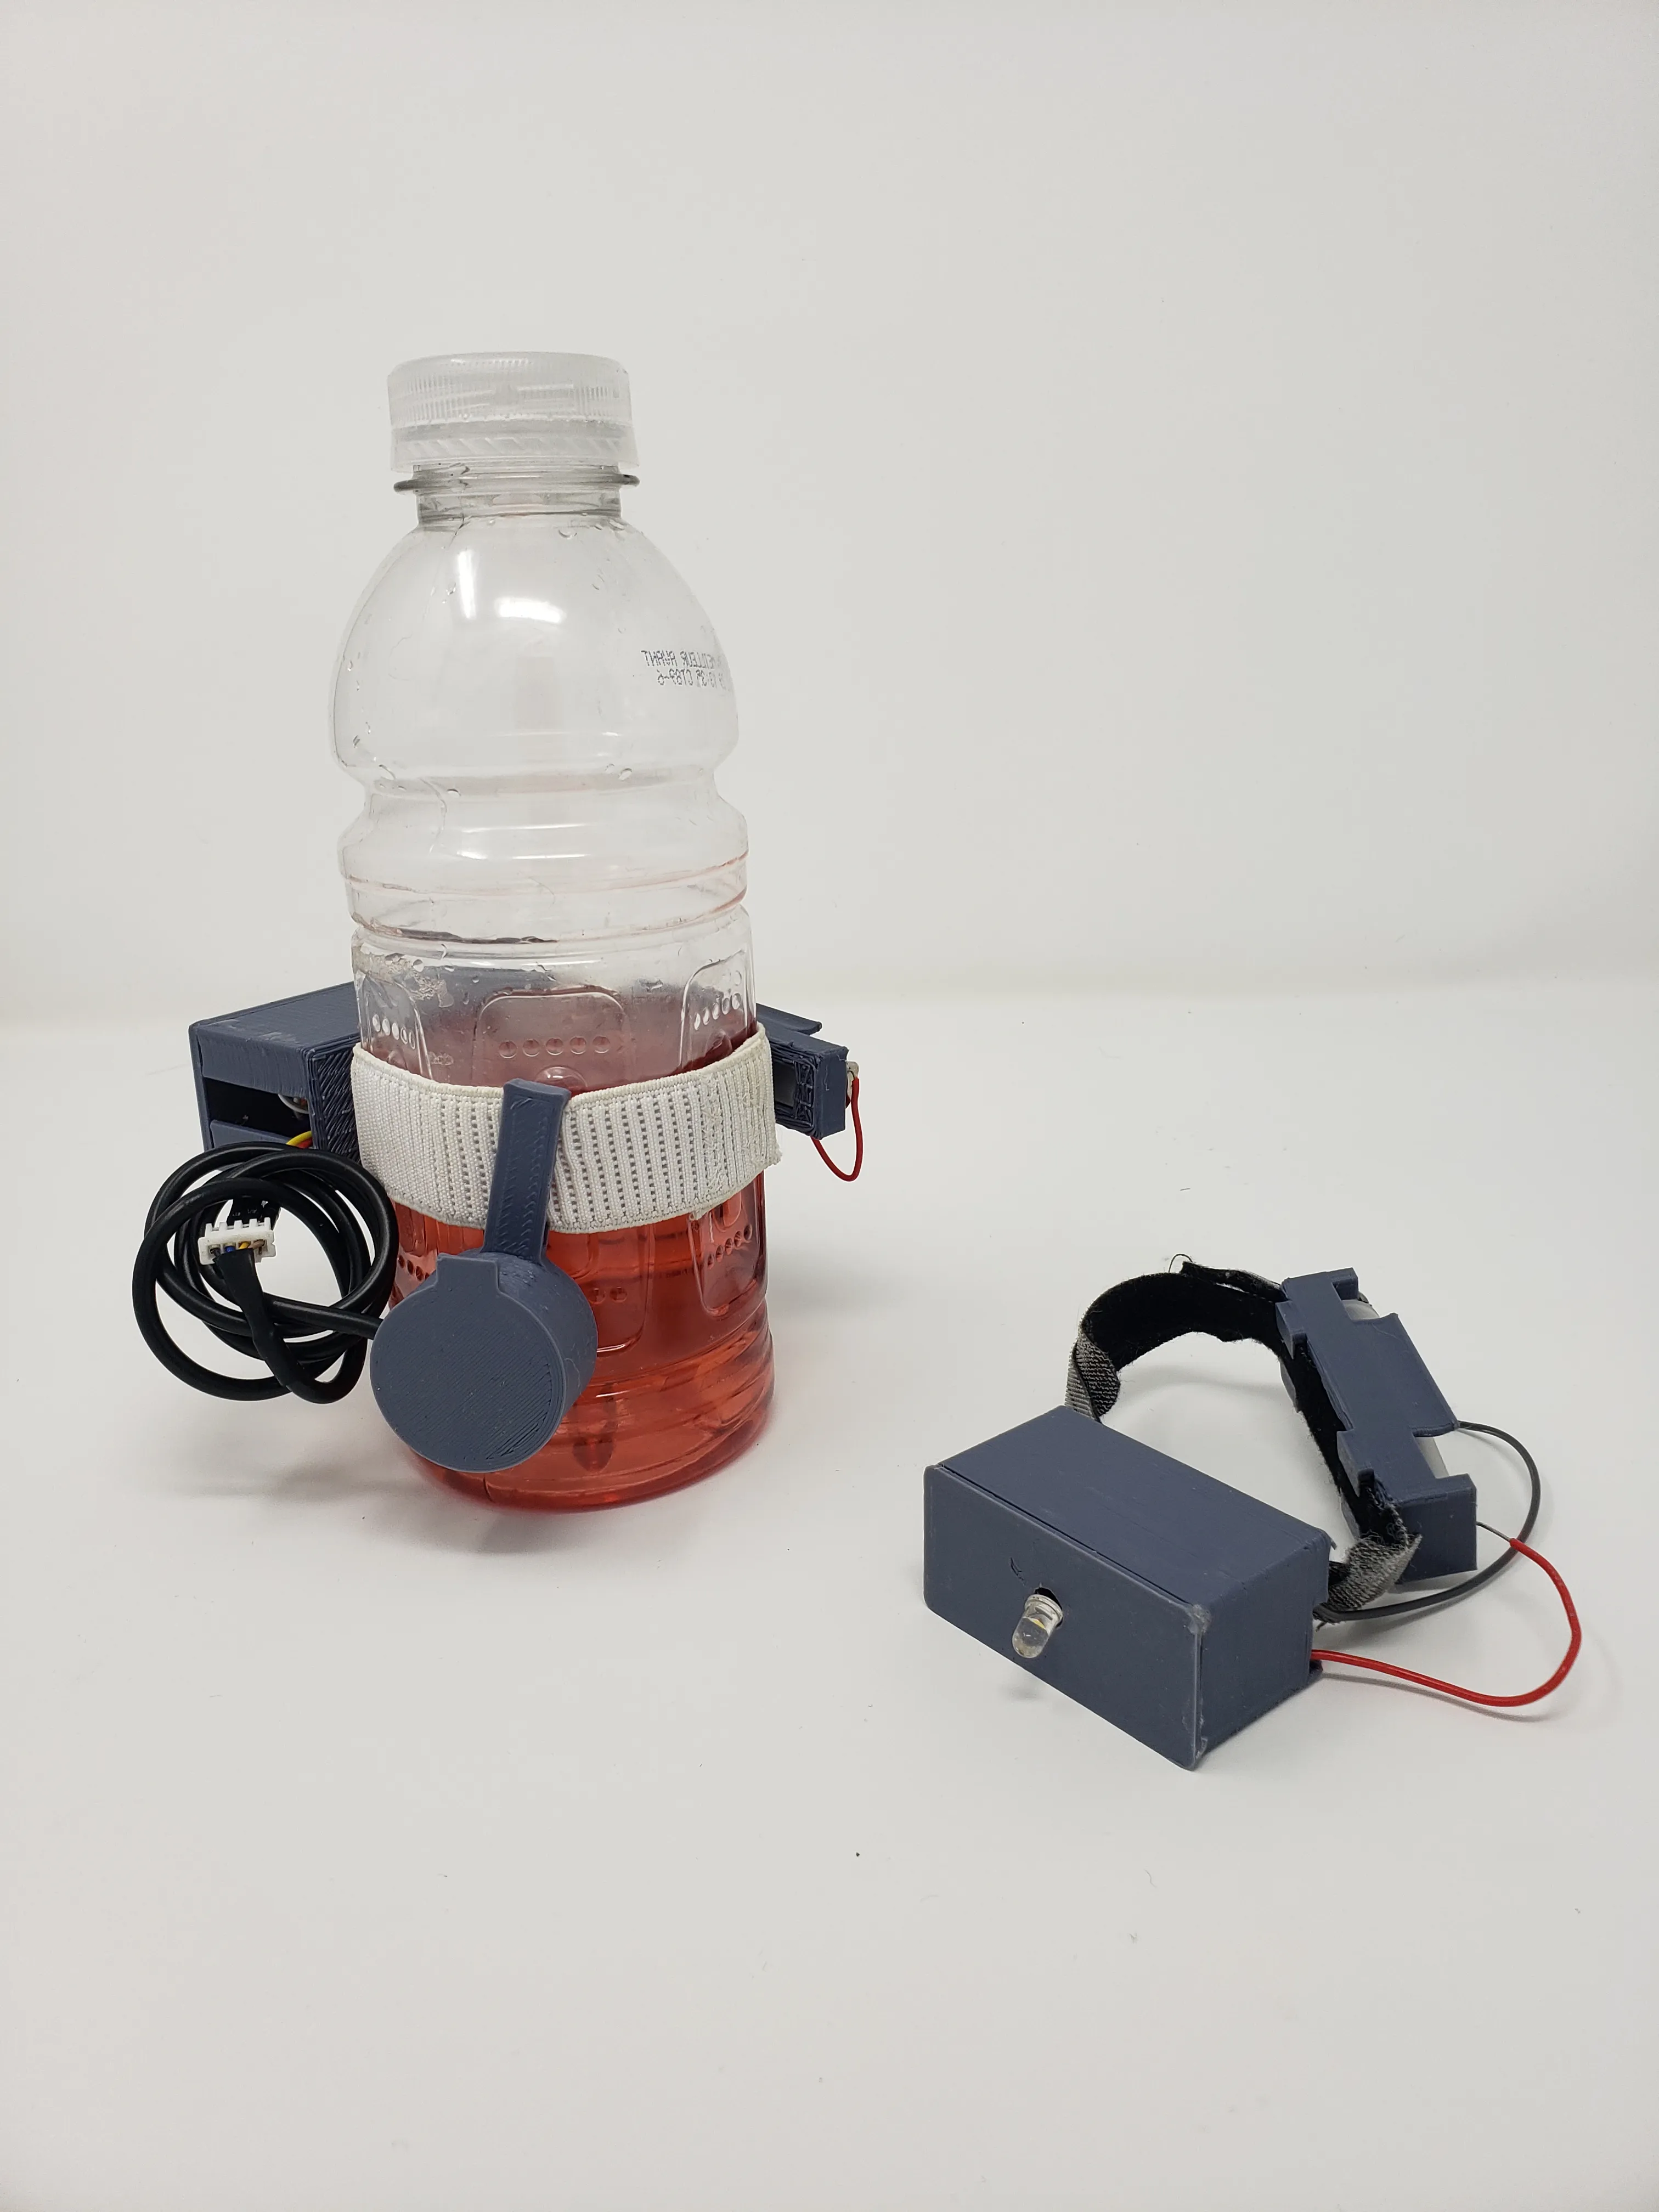 bottle filled with liquid higher than the non contact fluid sensor that is held onto the bottle with an elastic. Beside the bottle is a wrist band with an led off. 